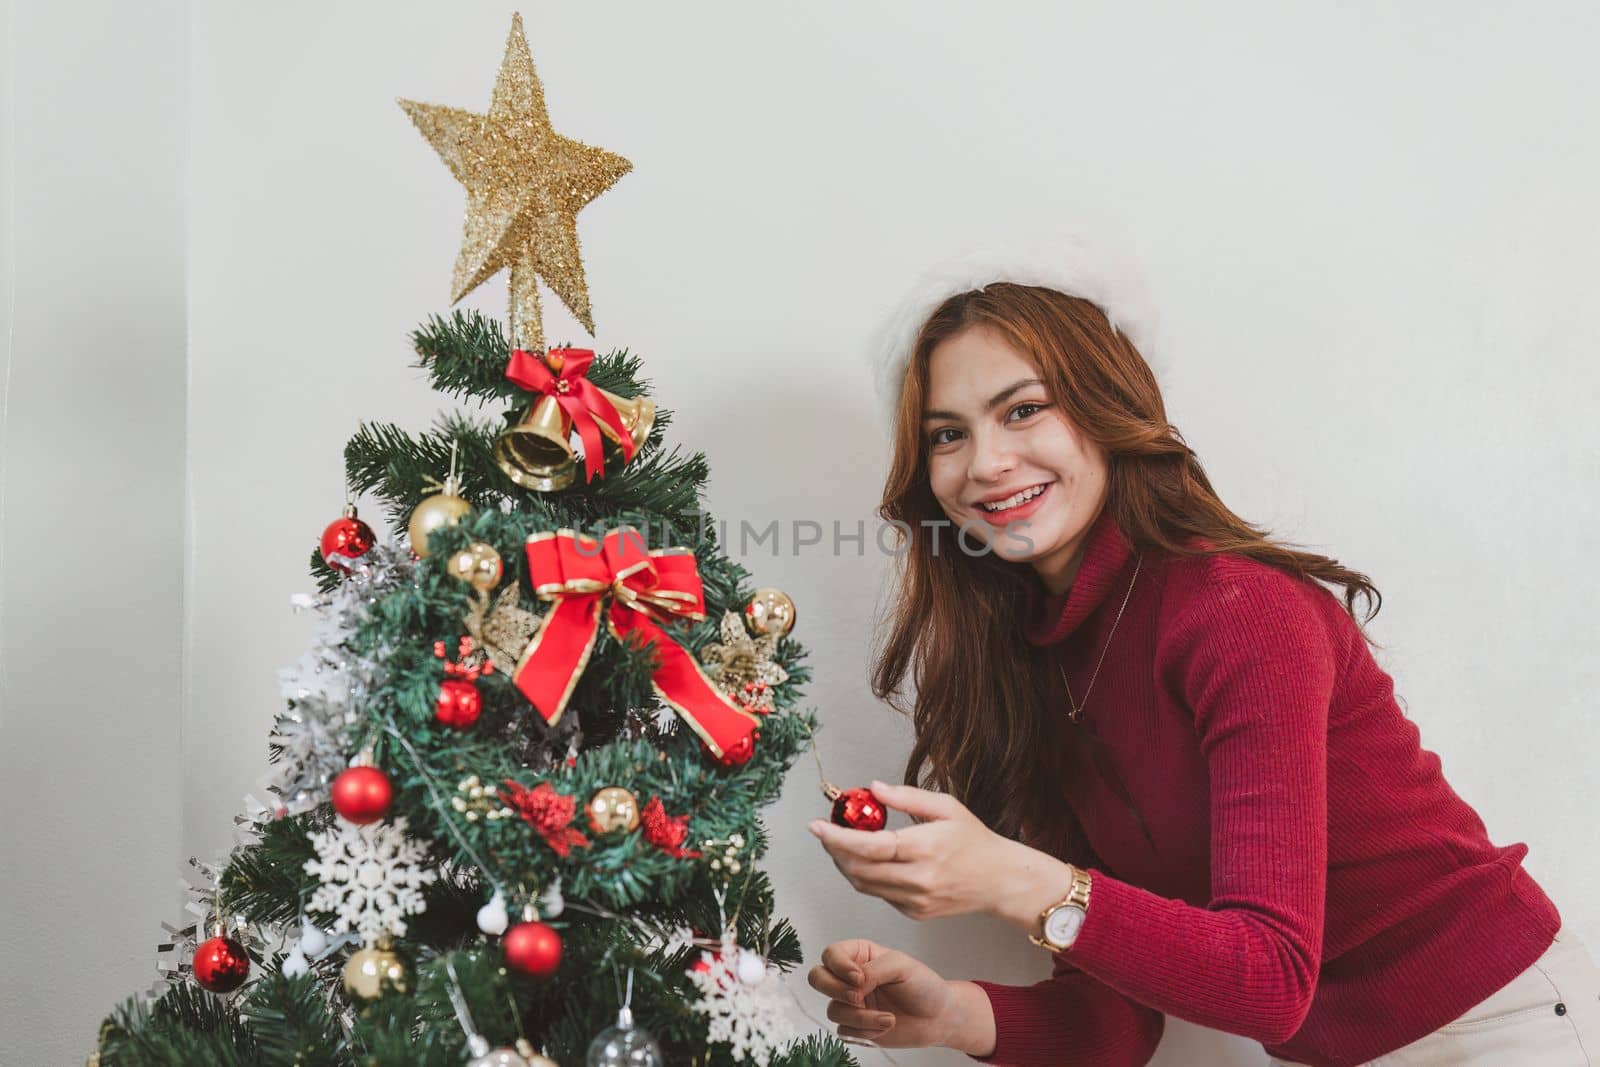 Cheerful lady surprised of the present after the opening in the gift box. Marry Christmas and Happy Holidays and New Year eve celebrating concept by itchaznong